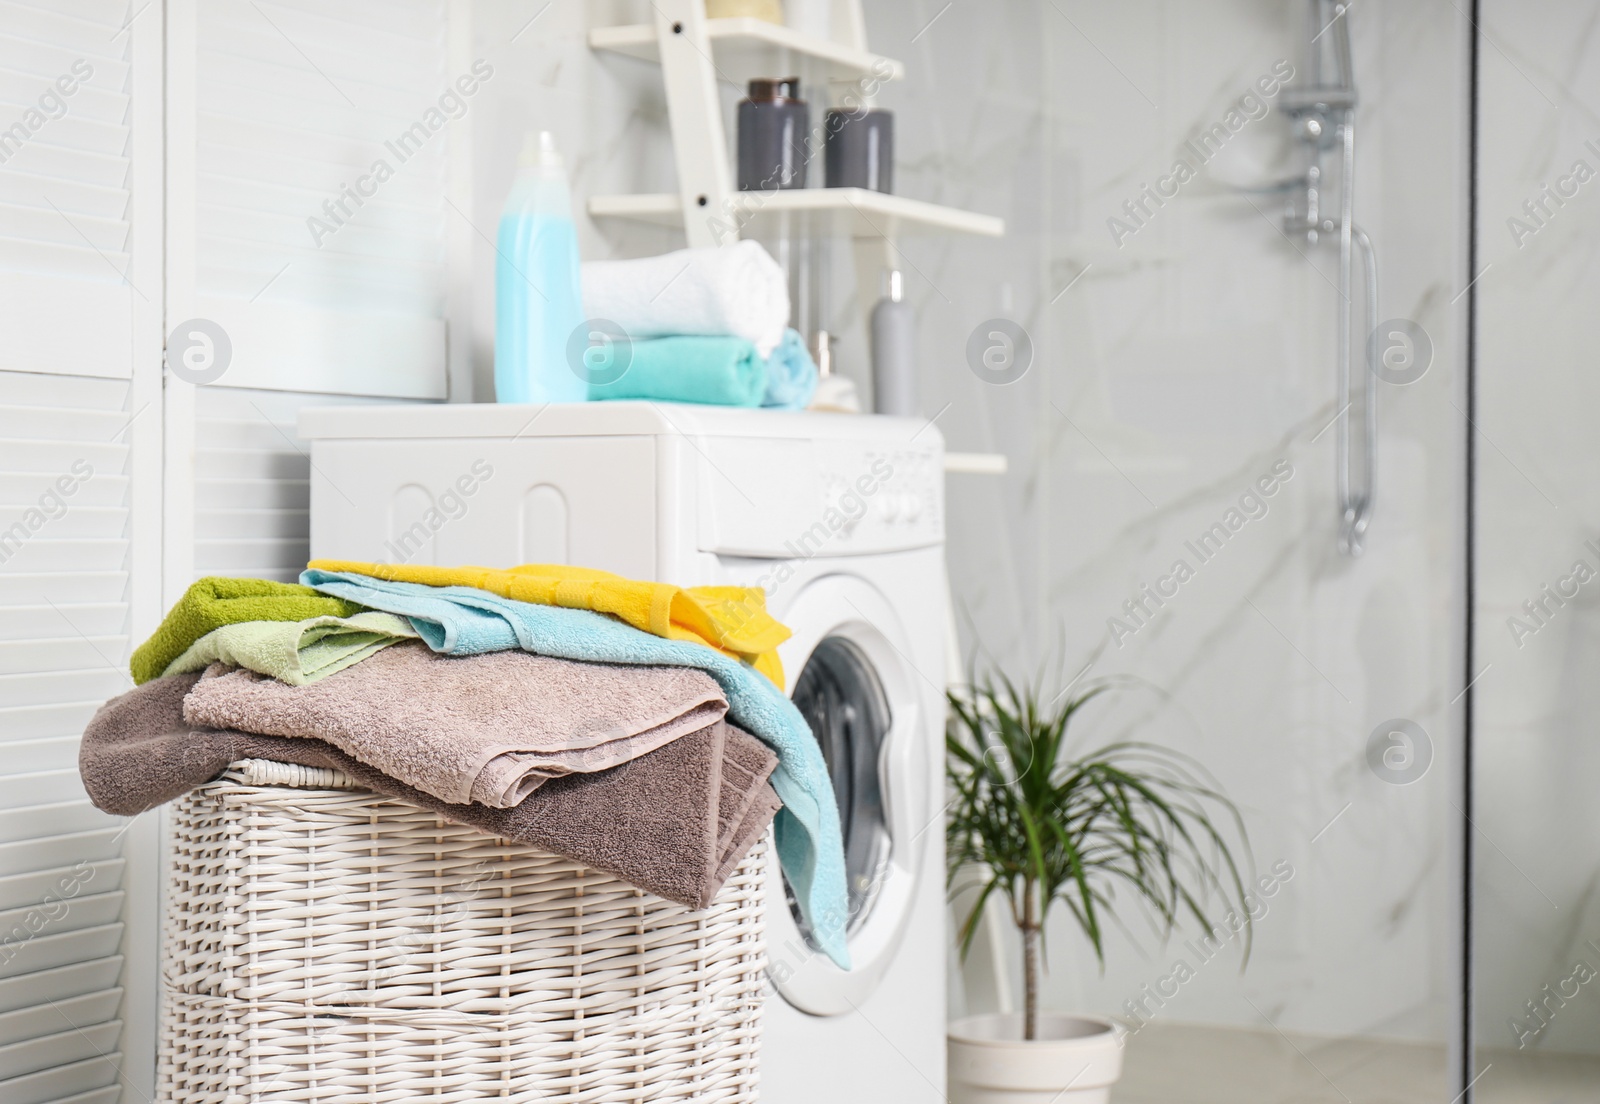 Photo of Wicker basket with laundry and washing machine in bathroom. Space for text